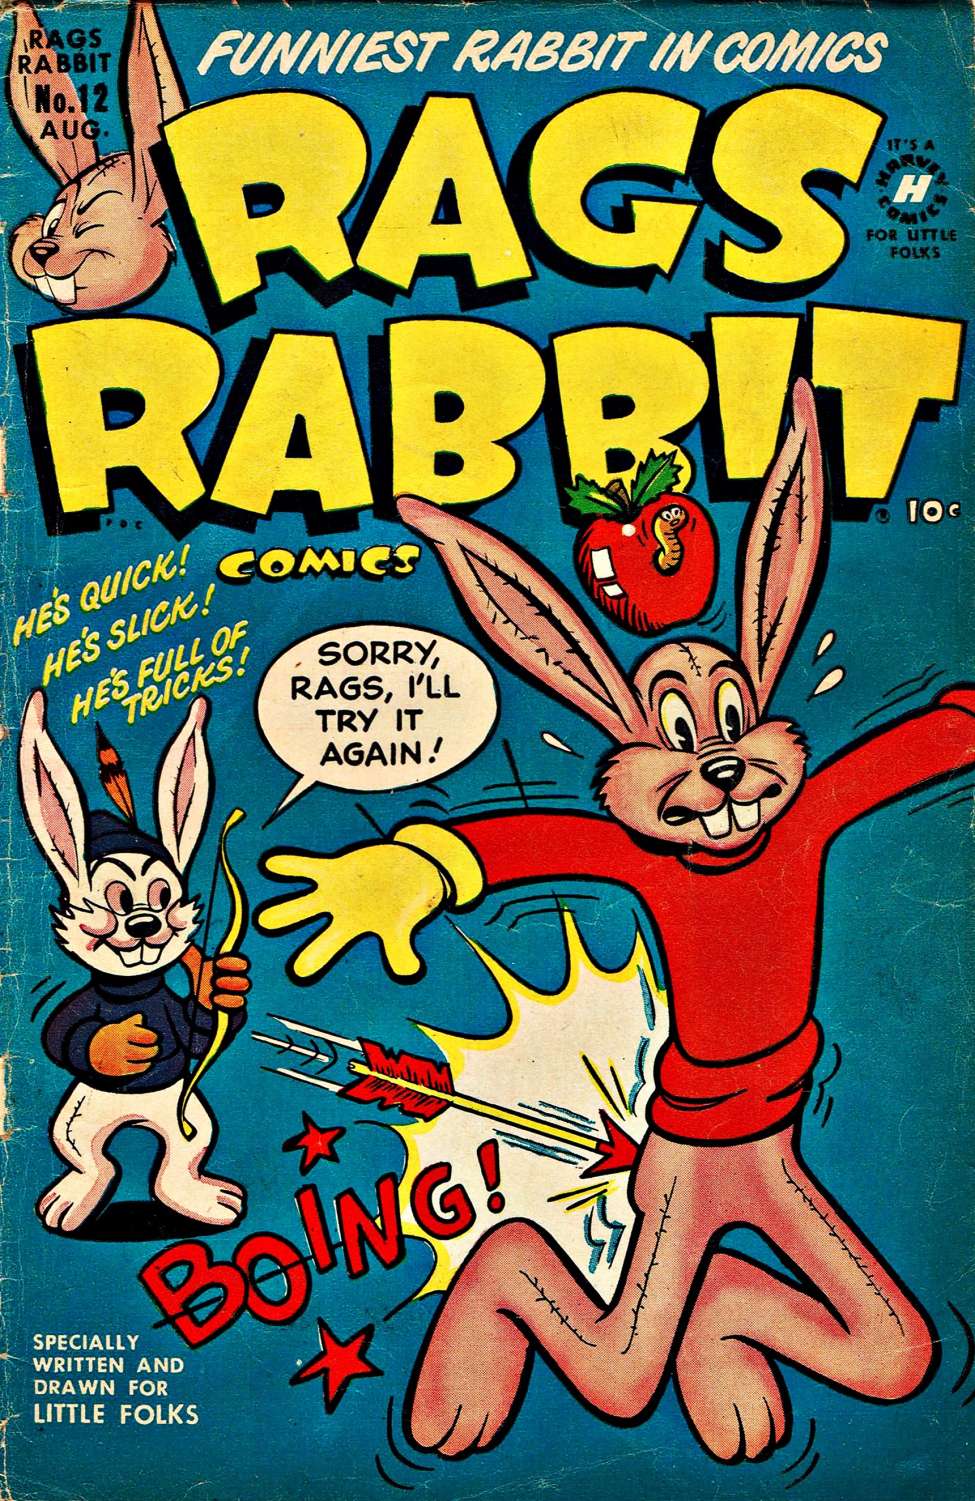 Book Cover For Rags Rabbit 12